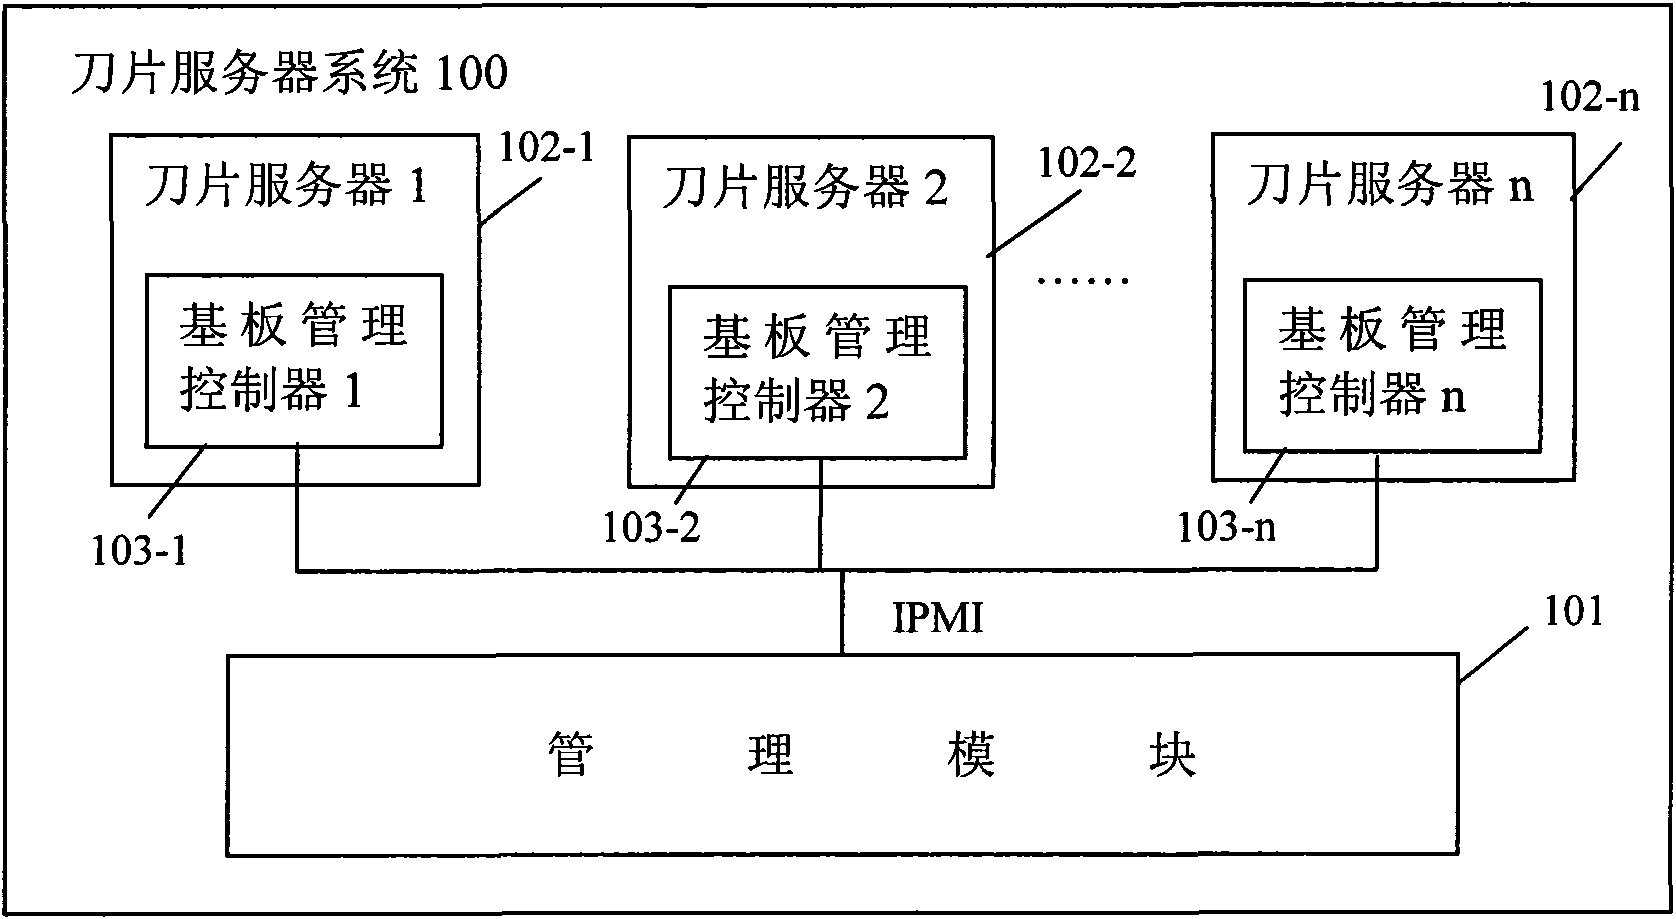 Virtual machine manager in blade server system and virtual machine processing method